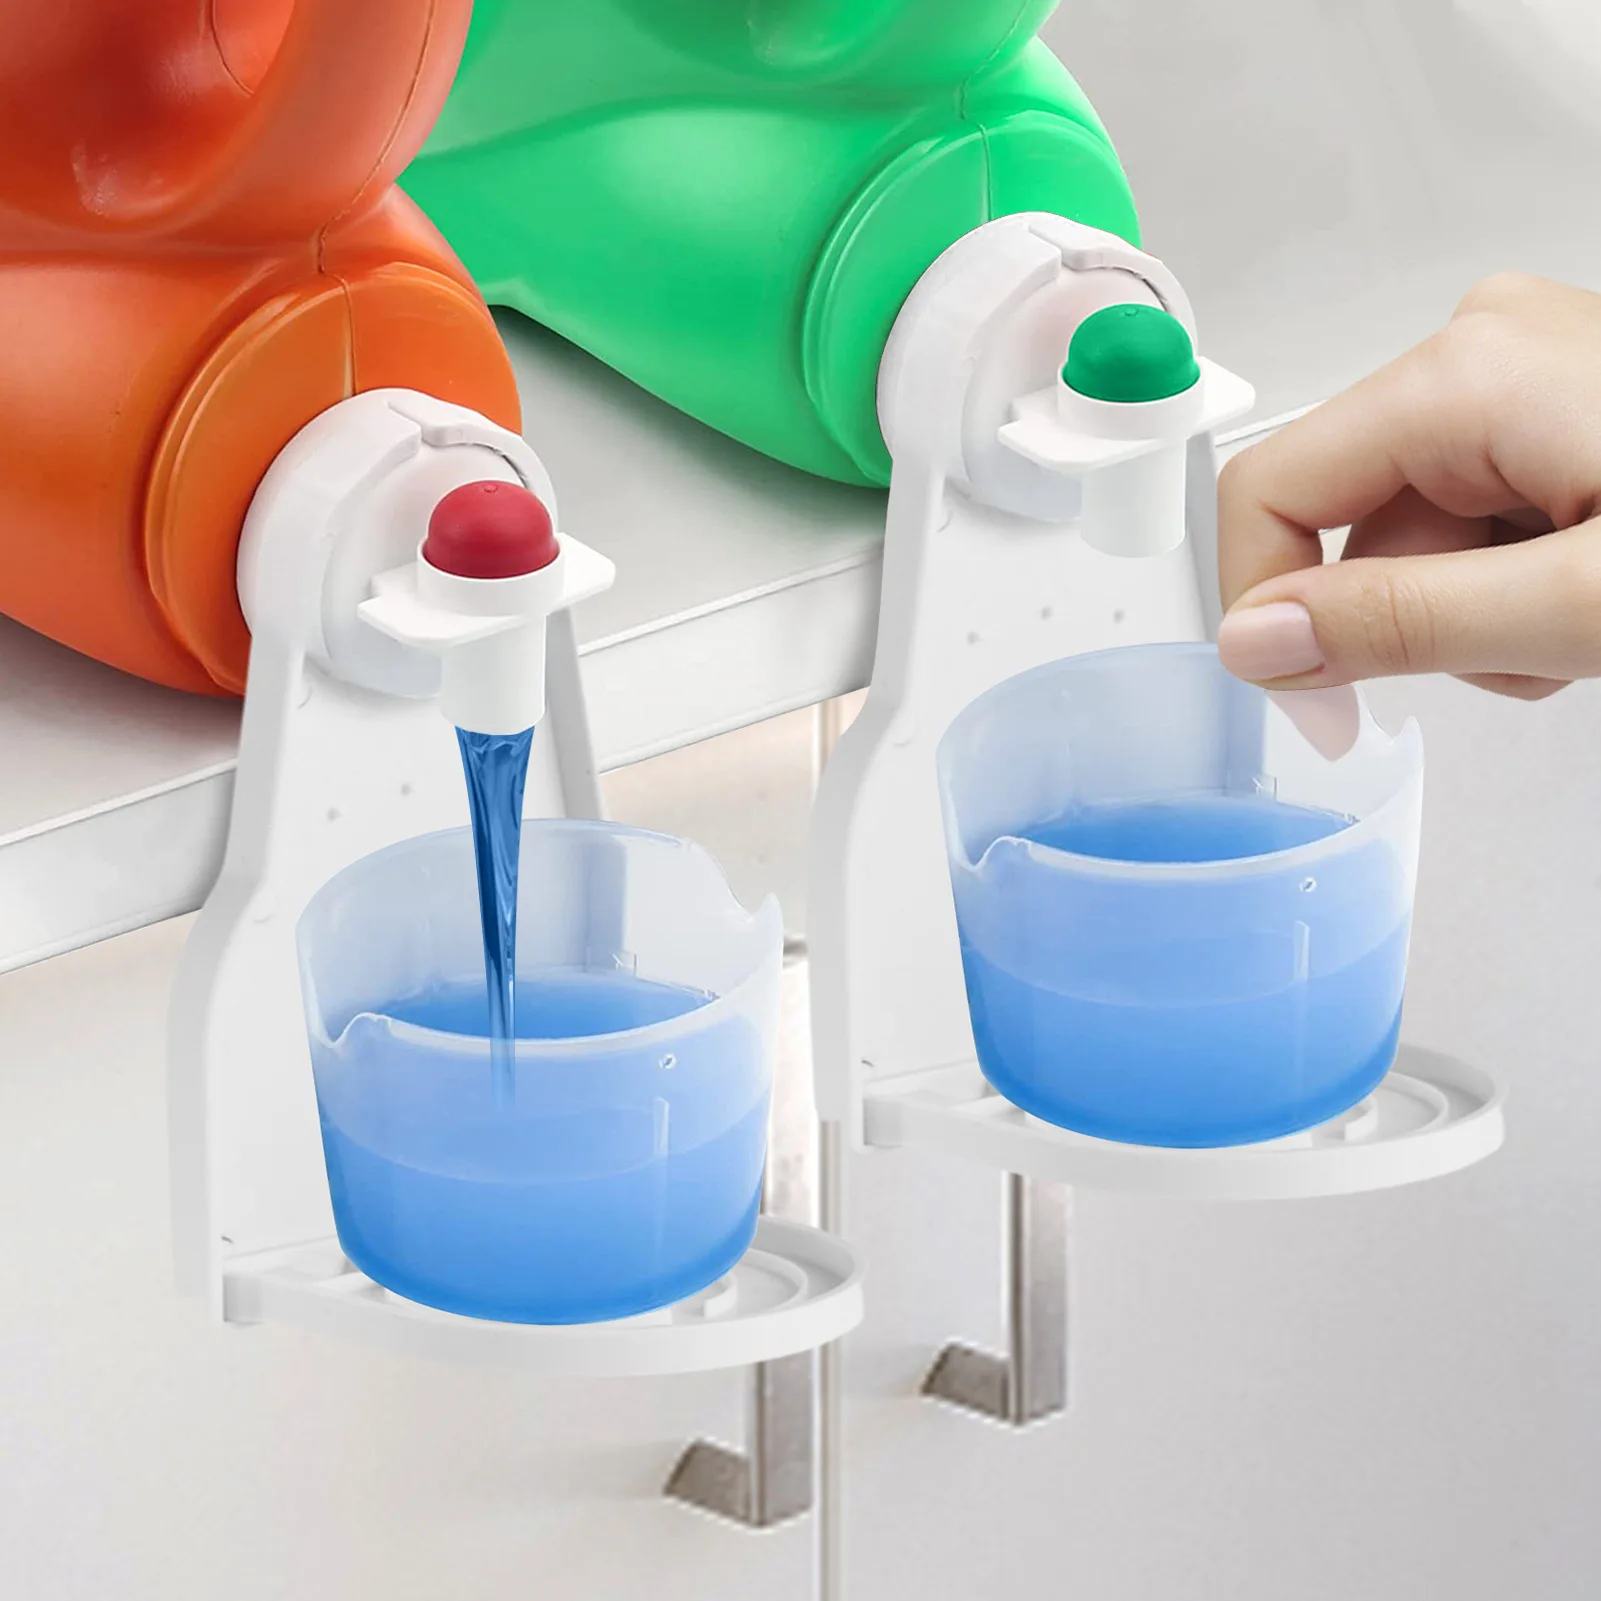 

Holder Laundry Detergent Laundry Catcher Mess Soap Station Accessories No Drip Organizer Cup Station